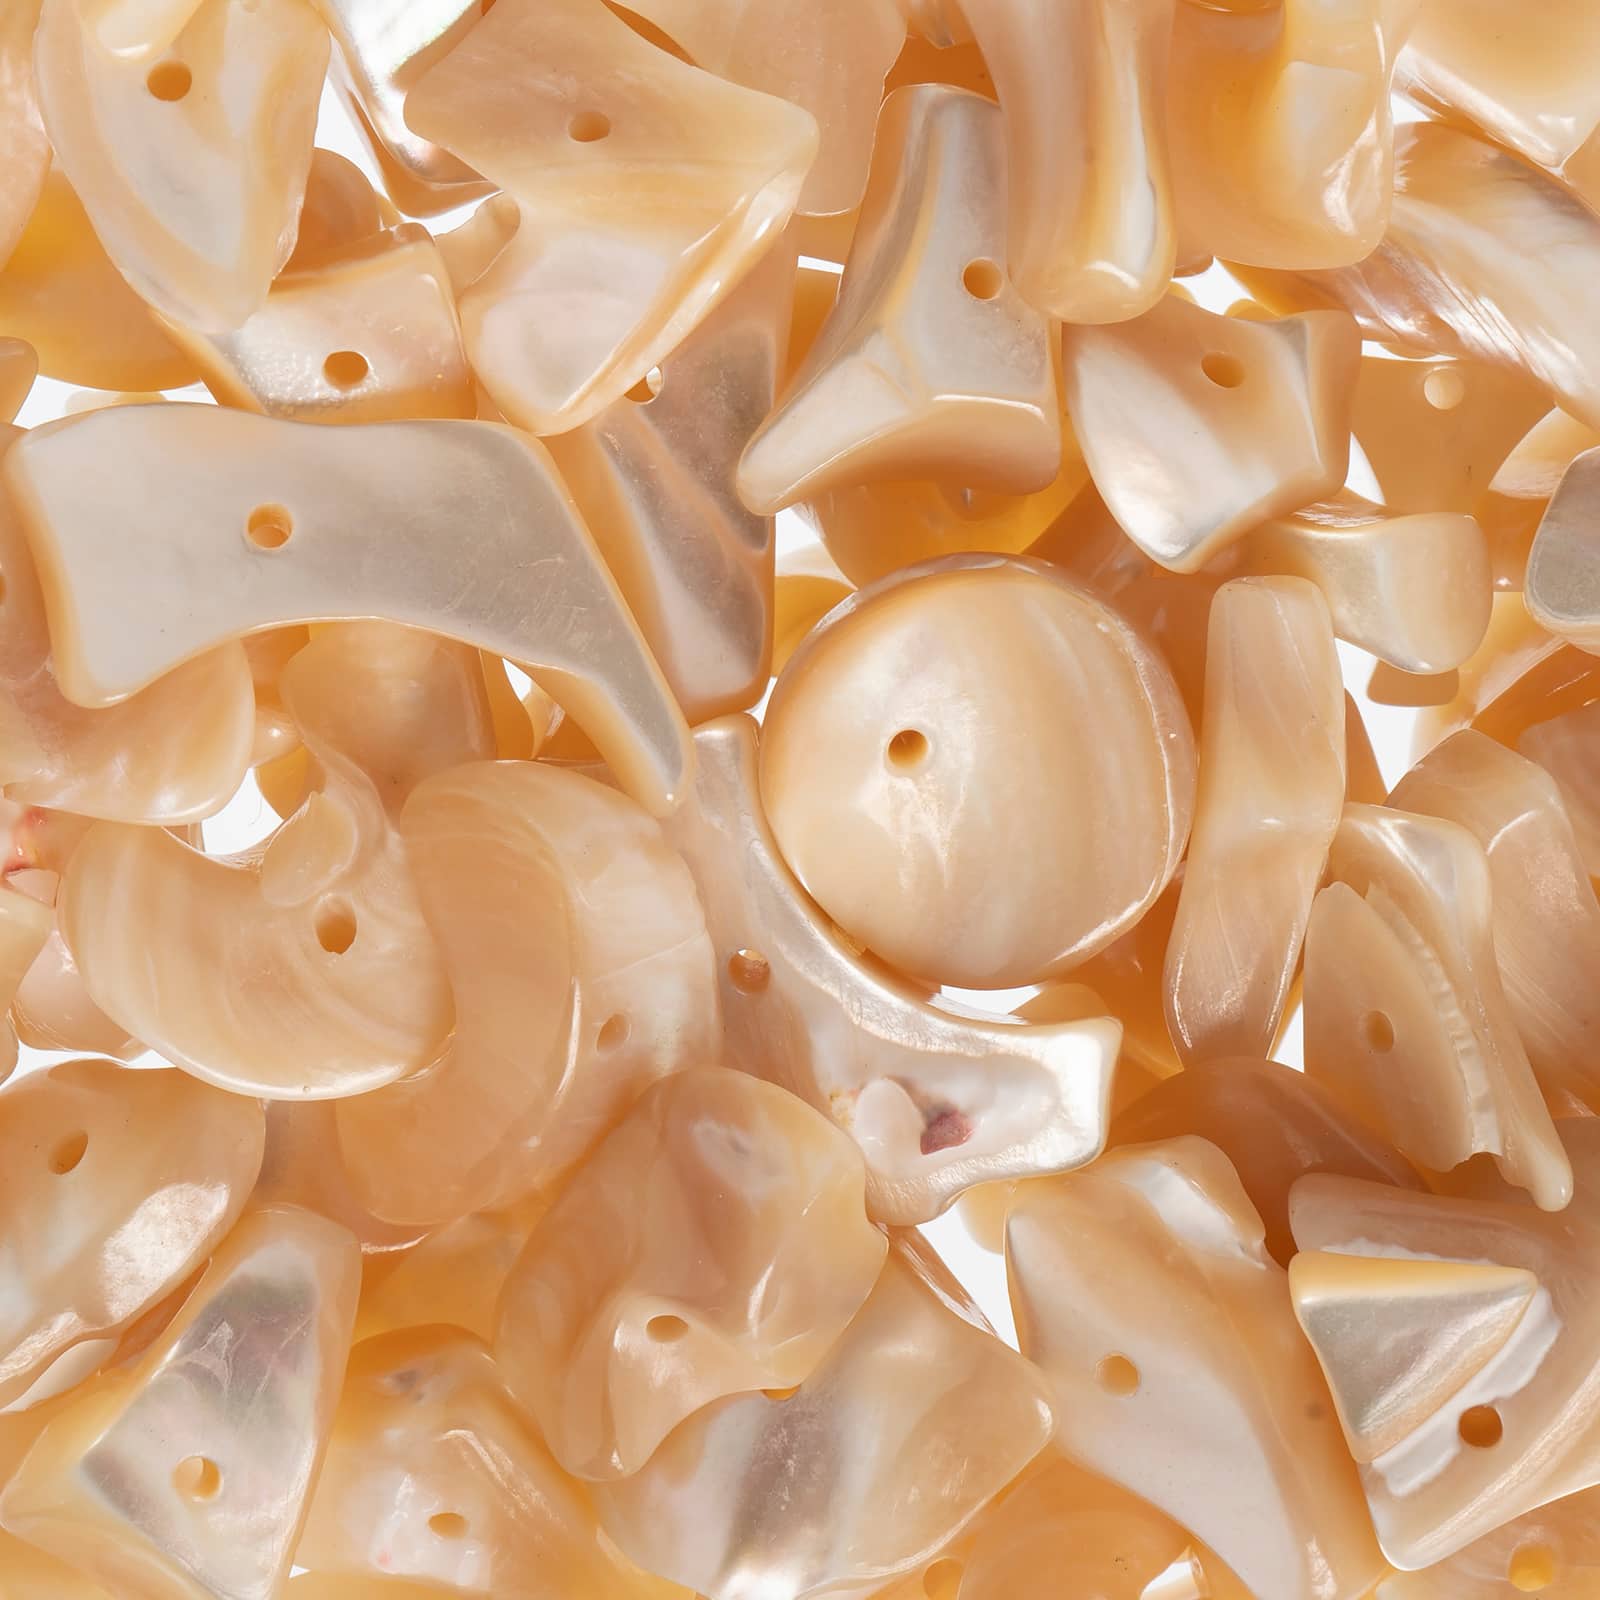 John Bead Natural Mother of Pearl Chip Beads, 24g